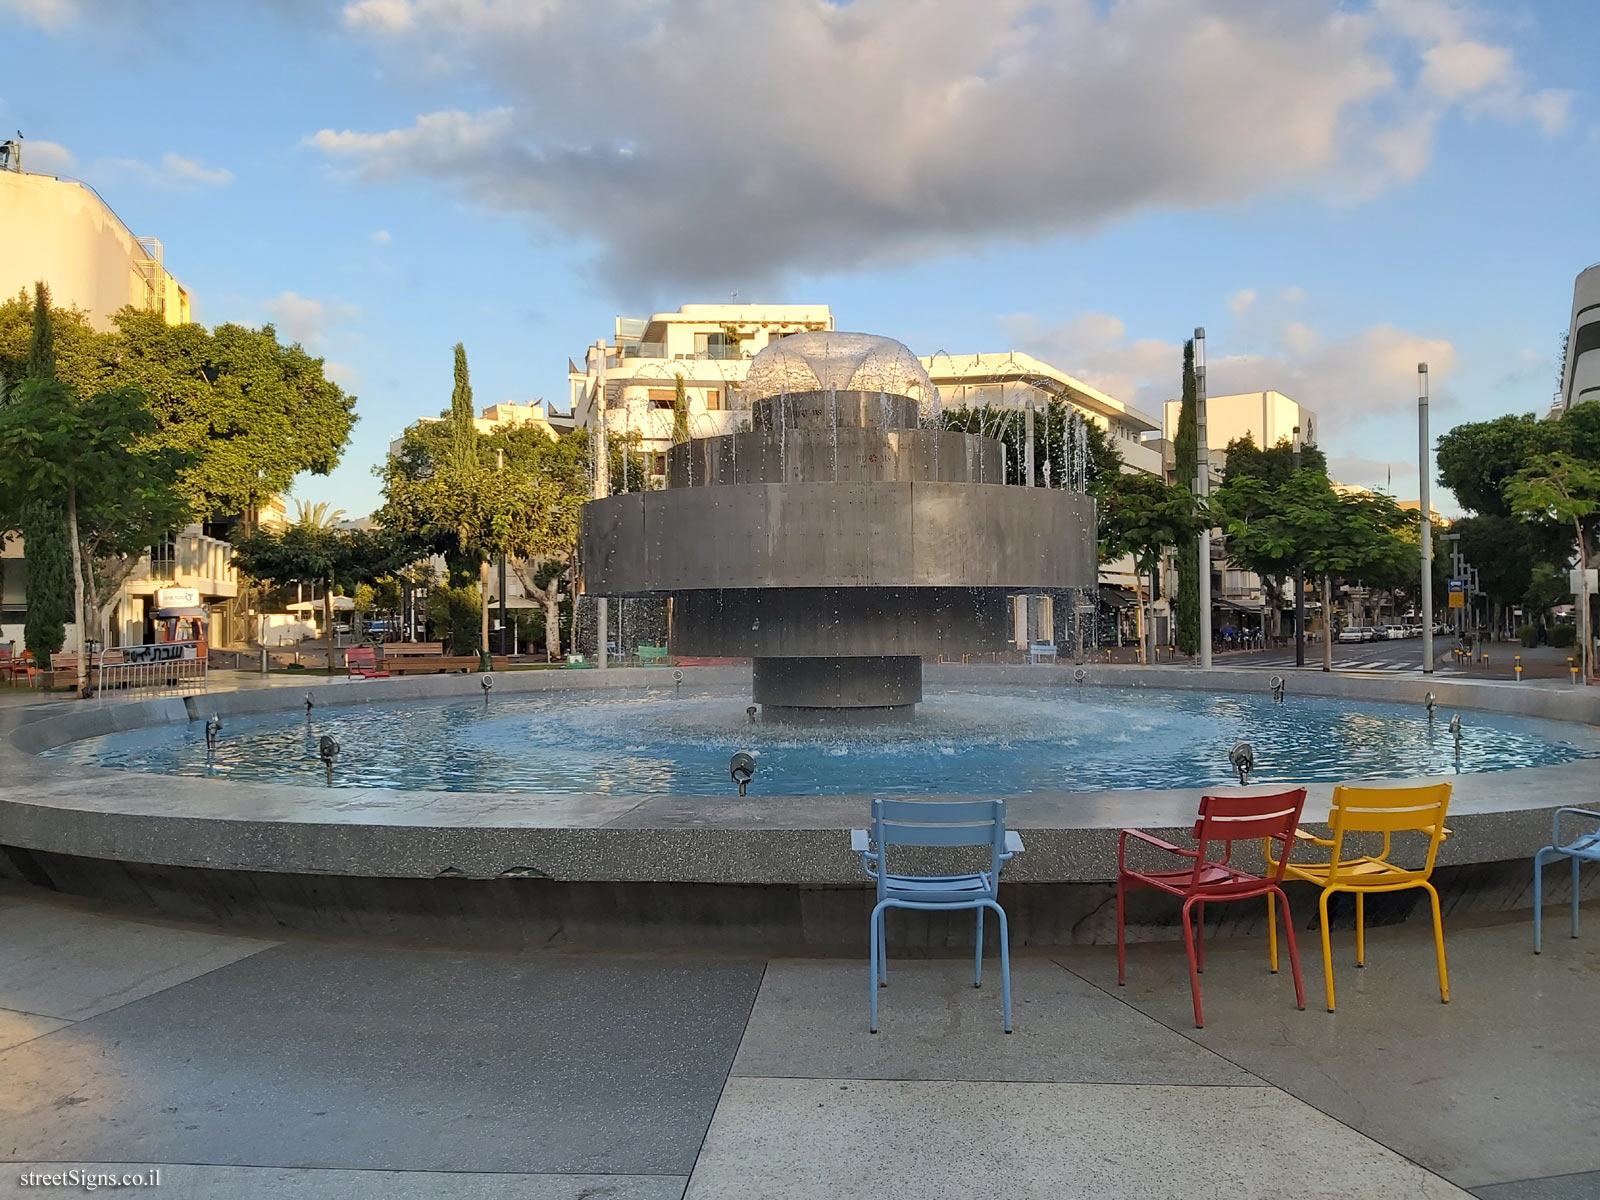 Tel Aviv - Dizengoff Square - "Water and Fire" by Yaakov Agam